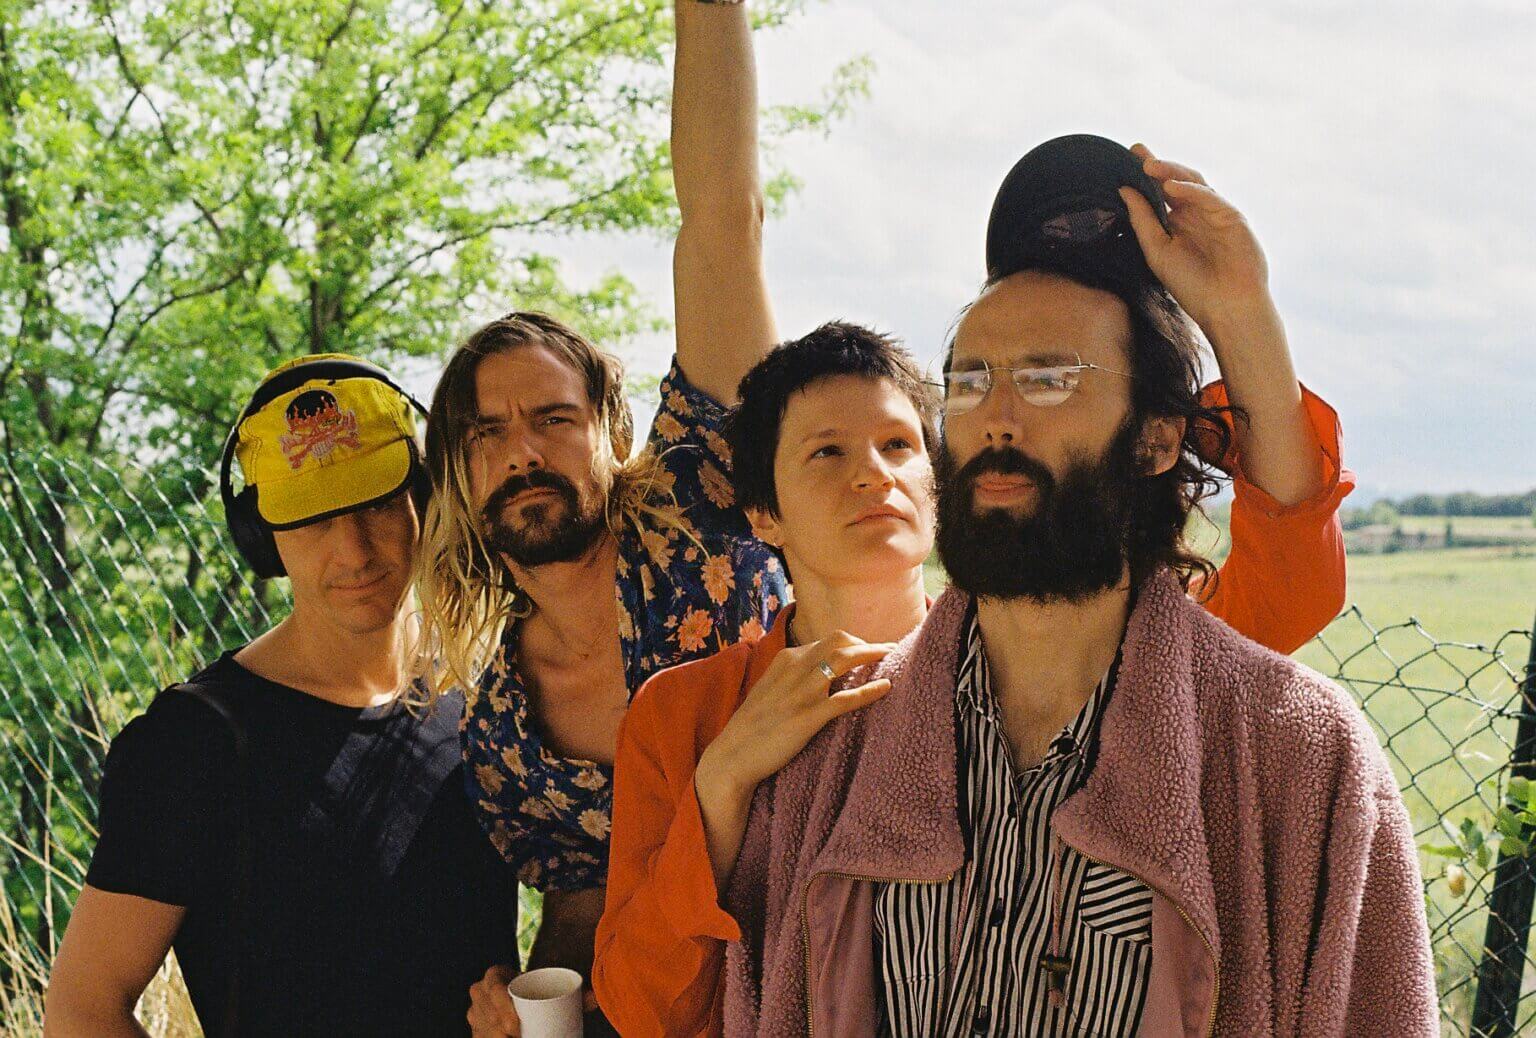 Big Thief Debut new single "Born For Loving You." The band's new single is now available via 4AD and streaming services